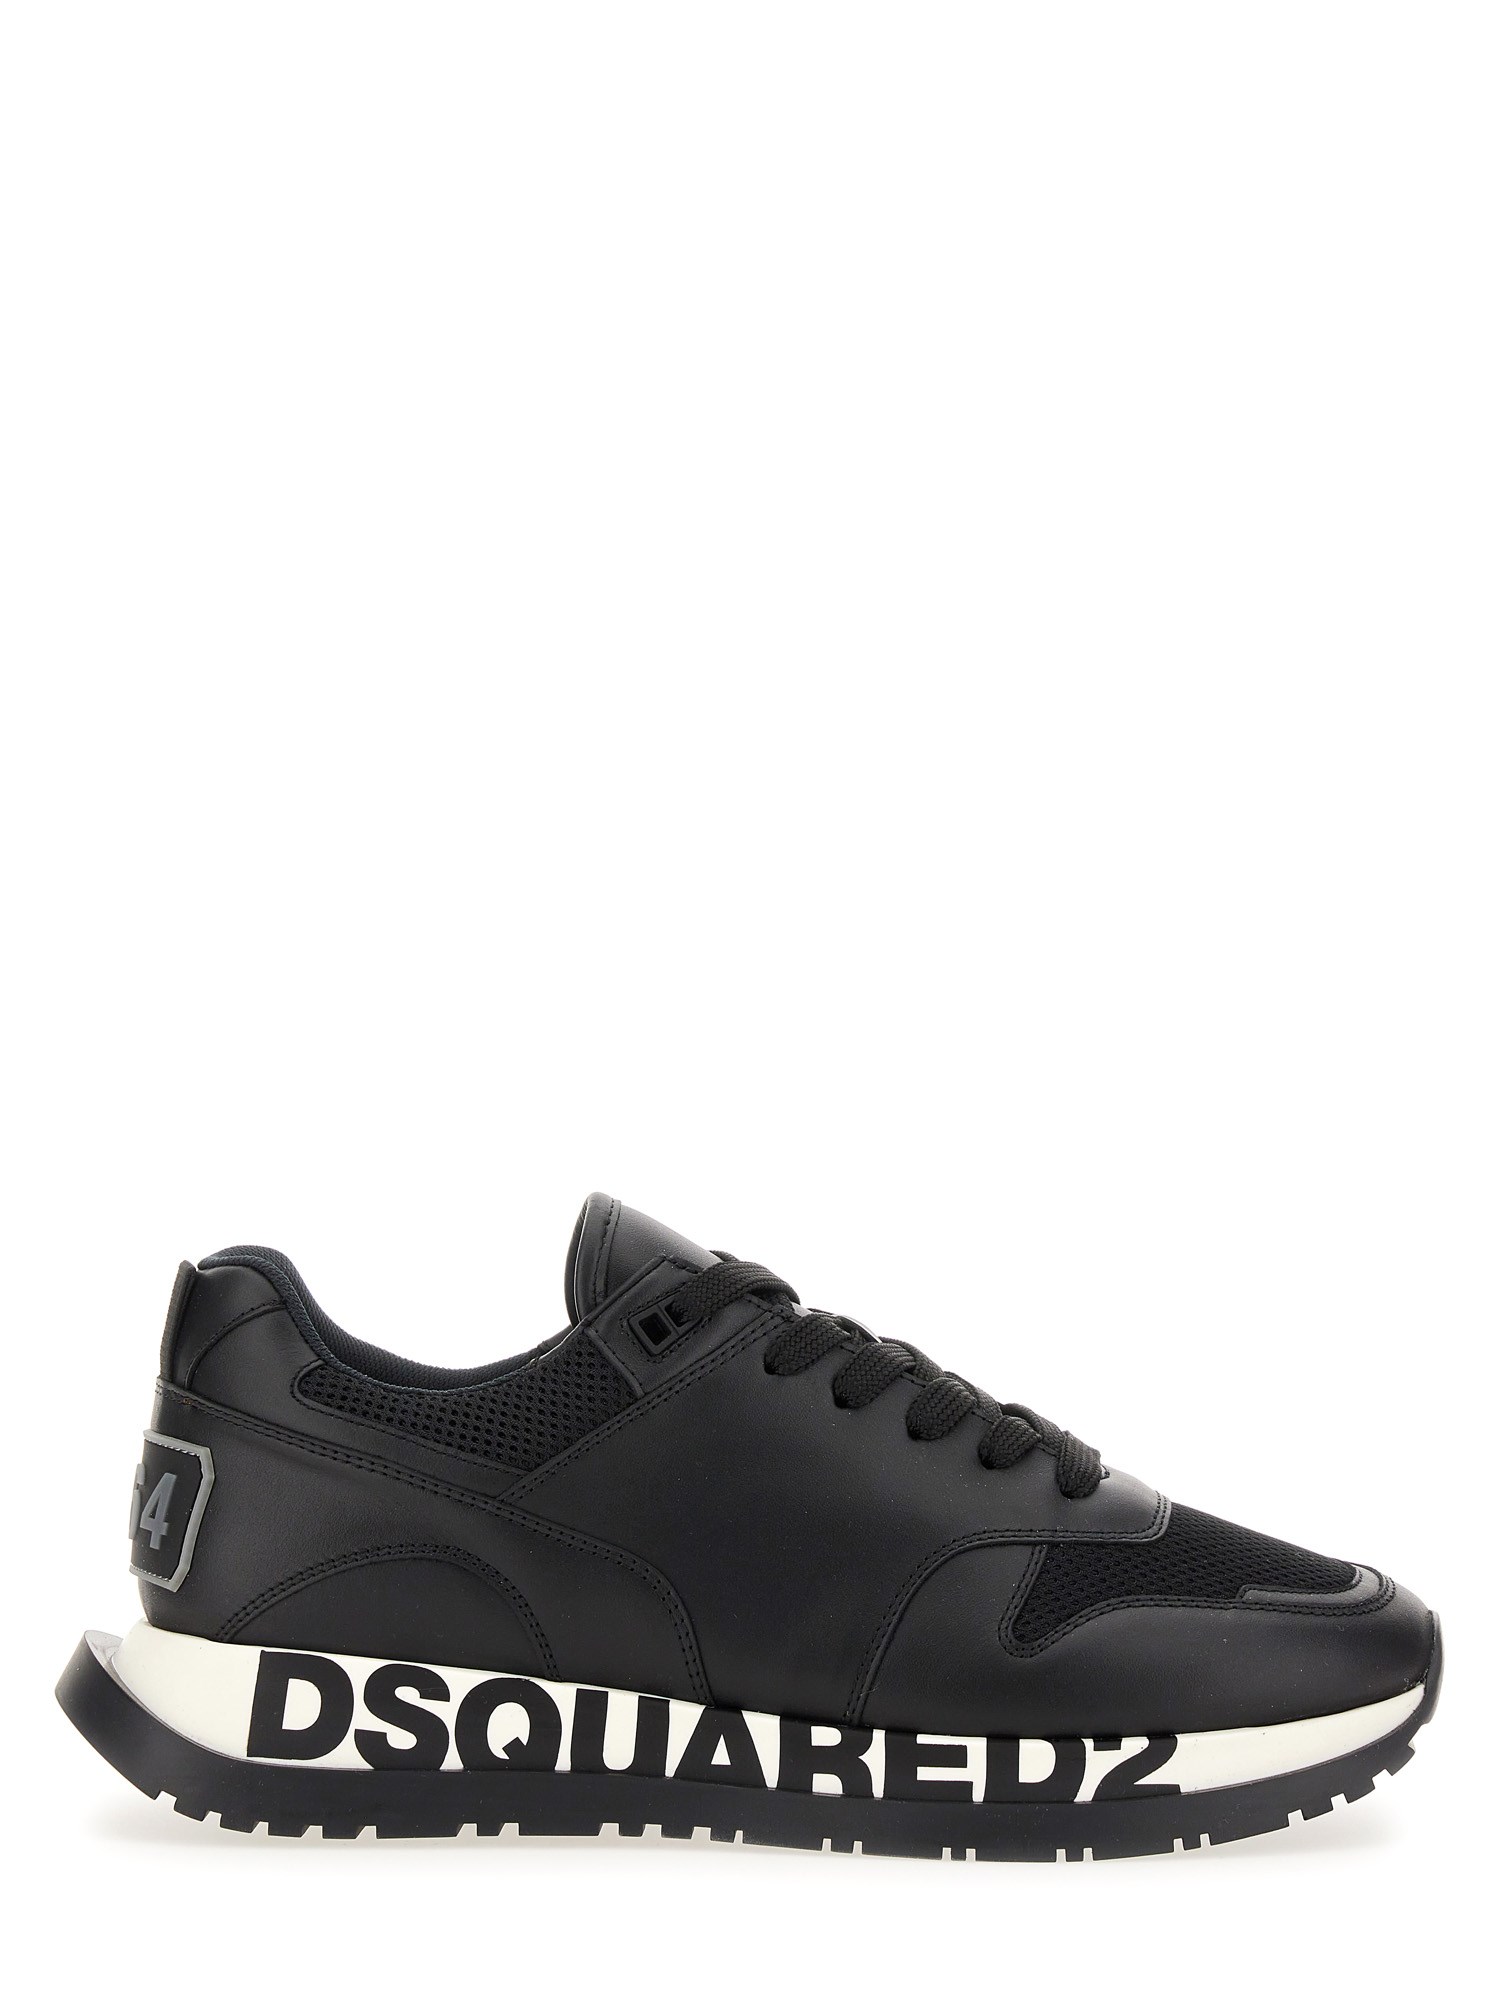 dsquared dsquared low-top sneaker